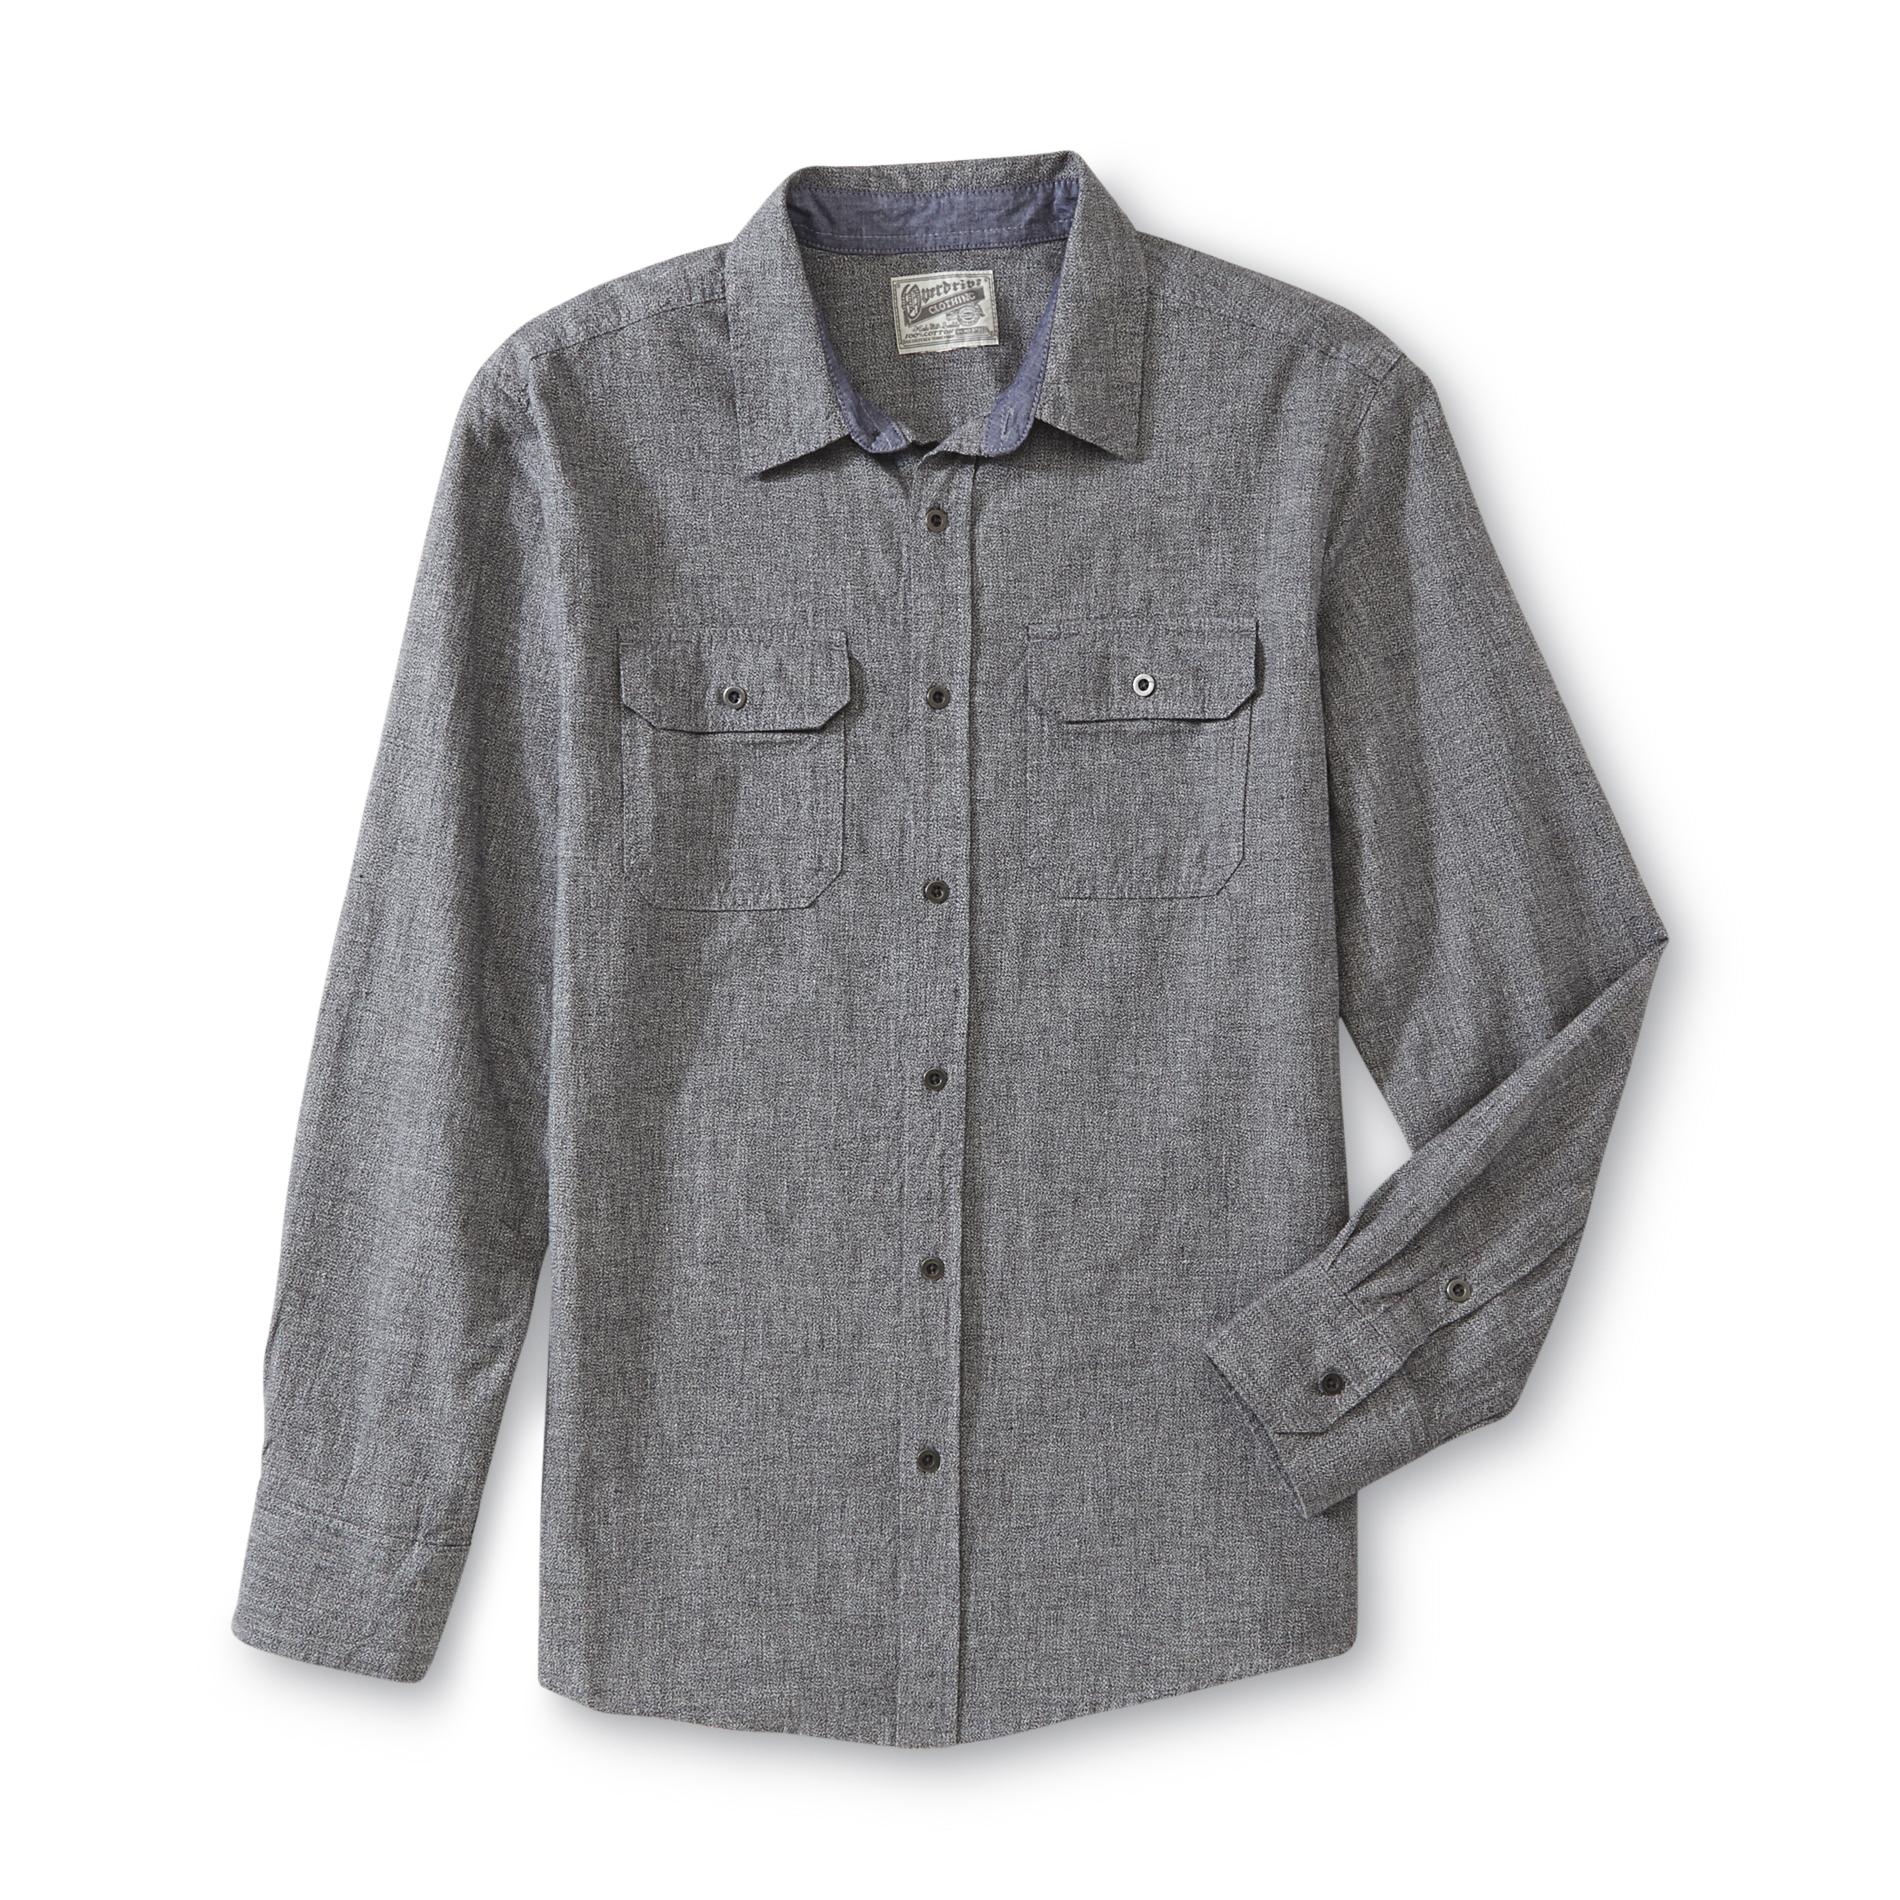 Overdrive Young Men's Long-Sleeve Shirt - Heathered